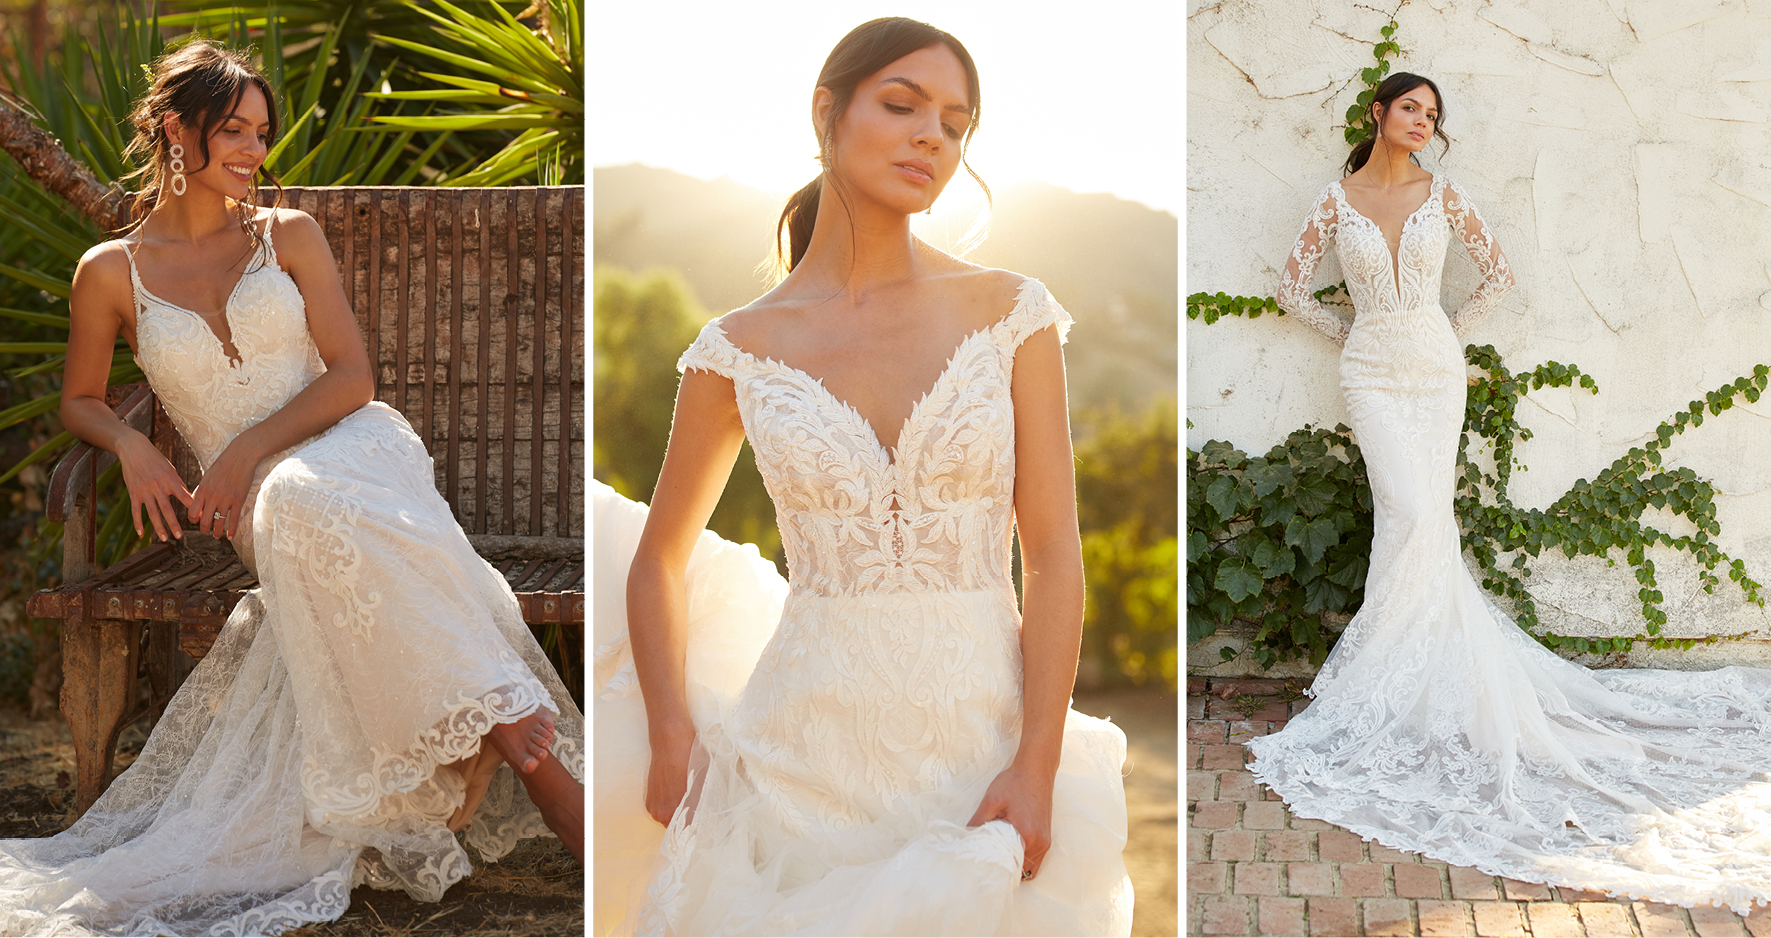 Simple wedding dresses with wow factor - Inspiration